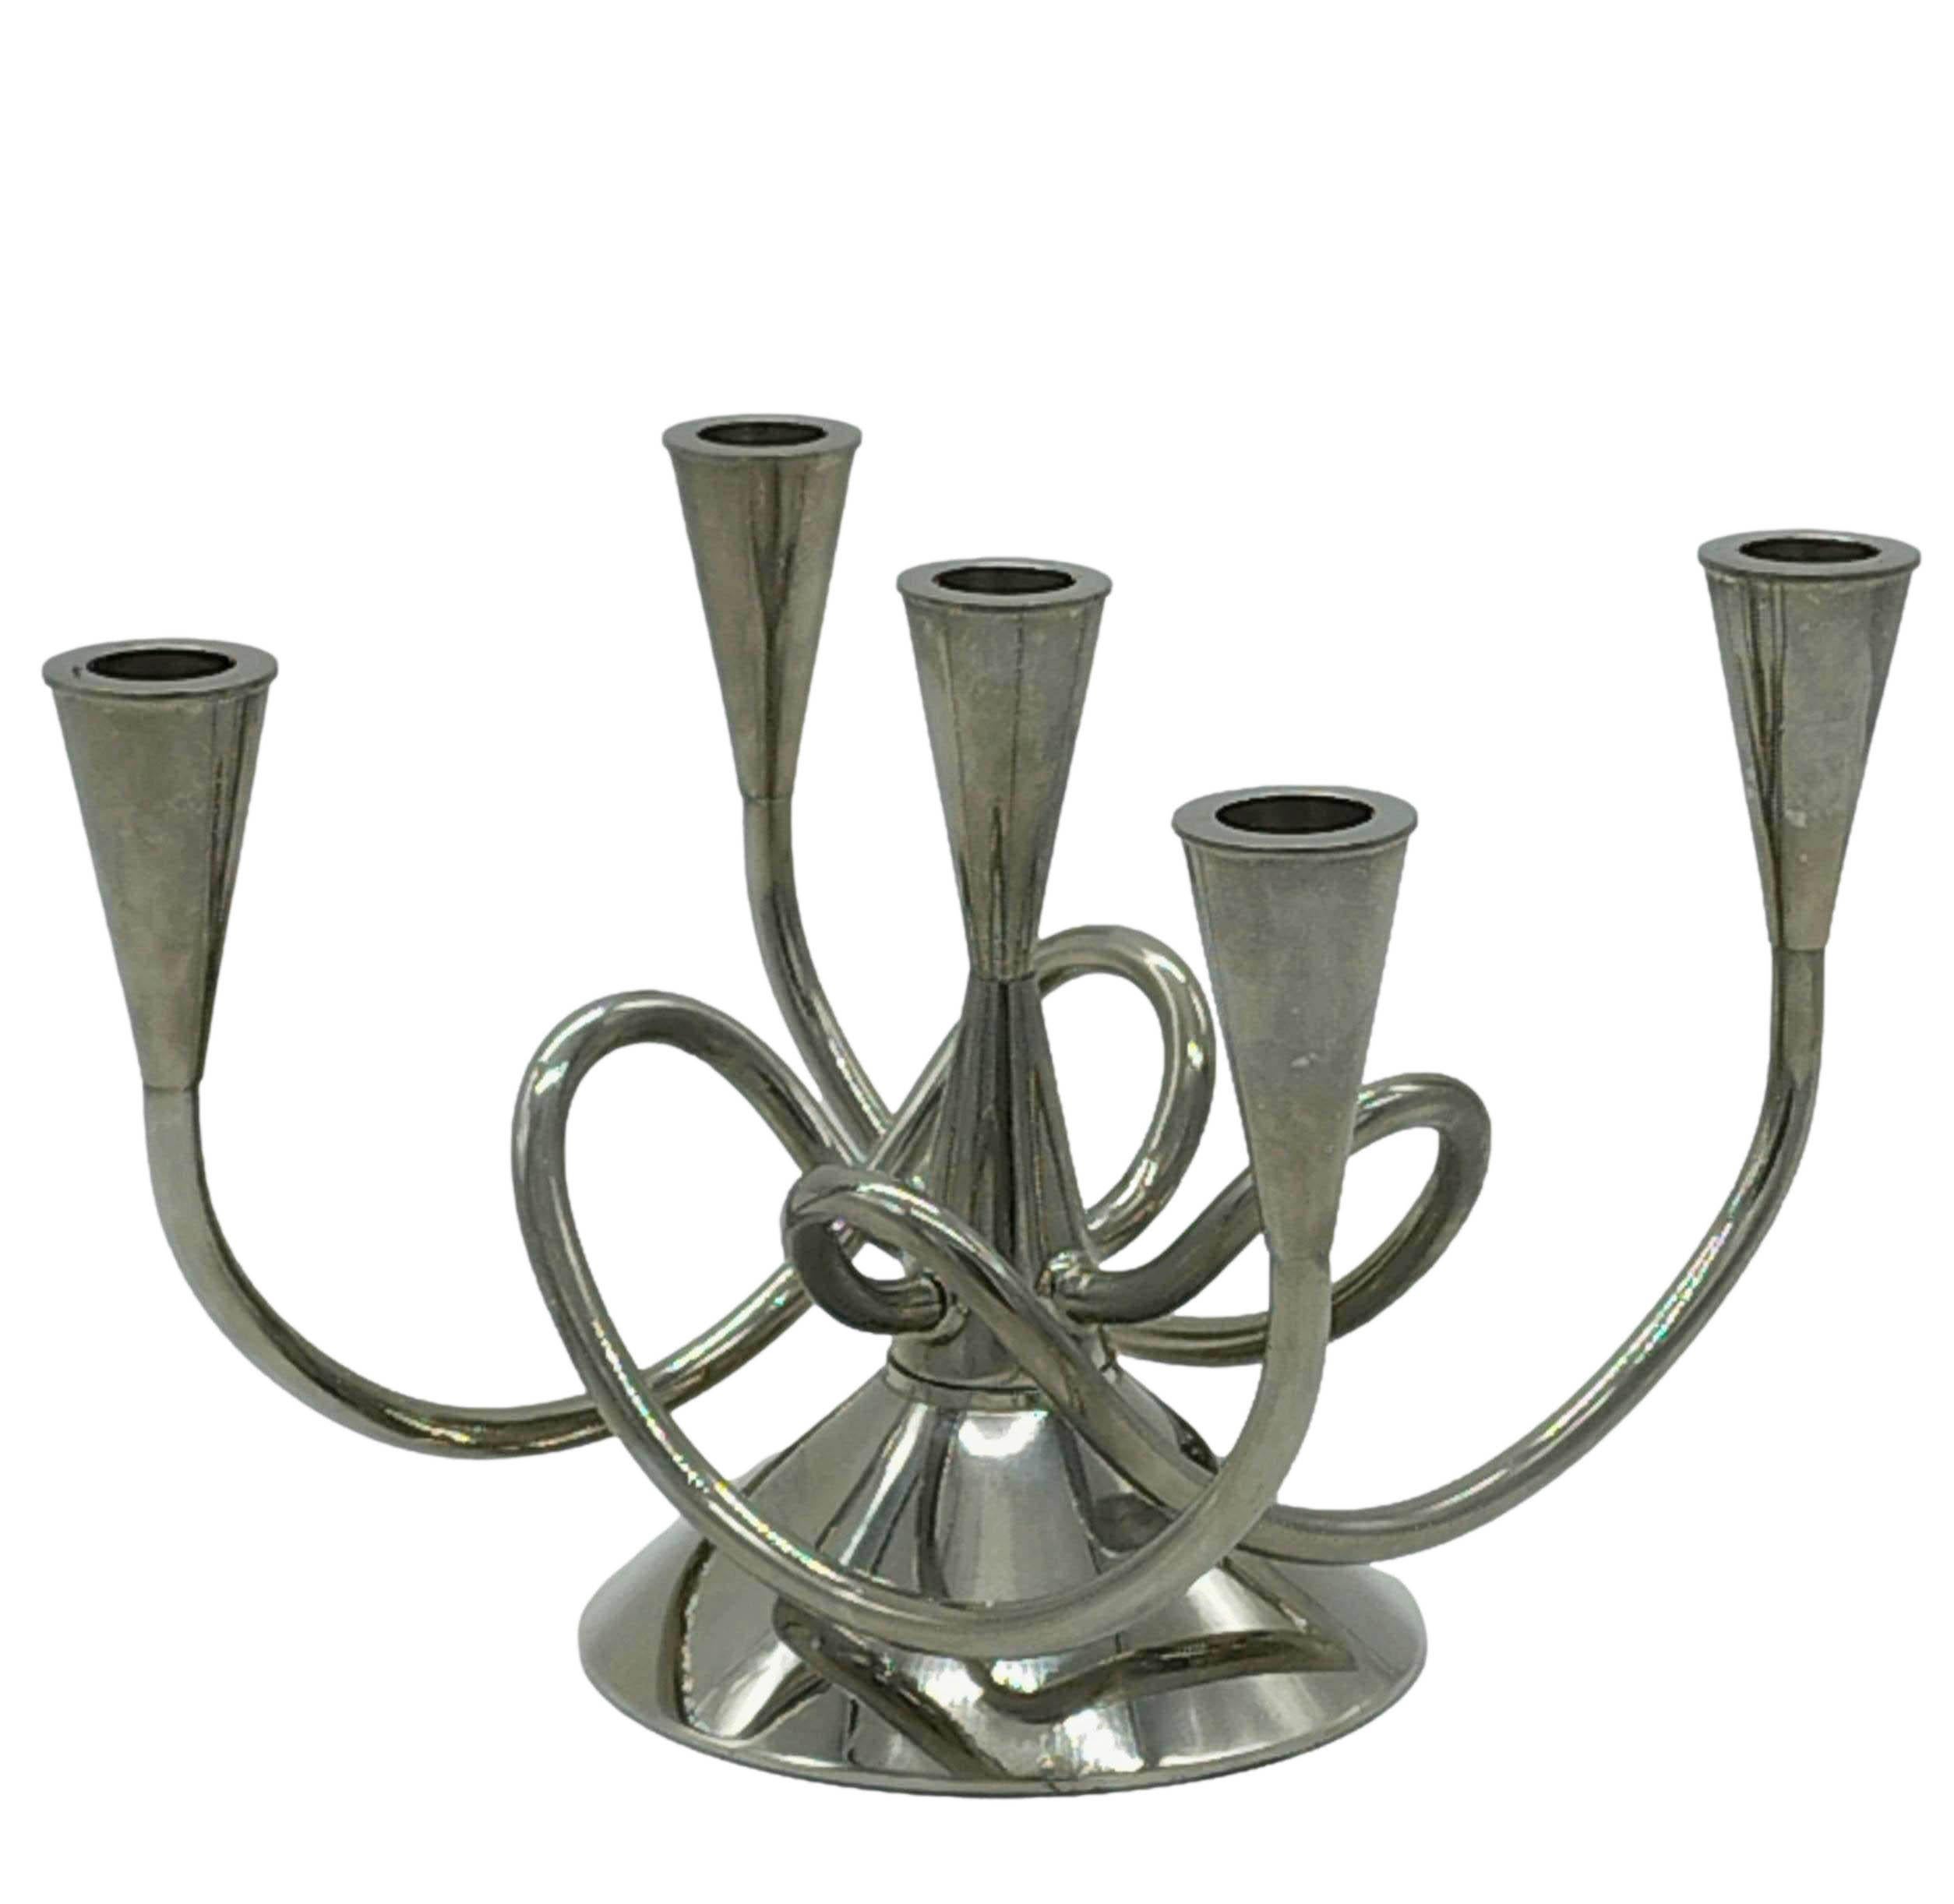 Matthew Boulton II' candelabra in brass with polished nickel finish, with 5 arms and distinguished by the characteristic grid, designed by Giuseppe Chigiotti for Driade 1970.